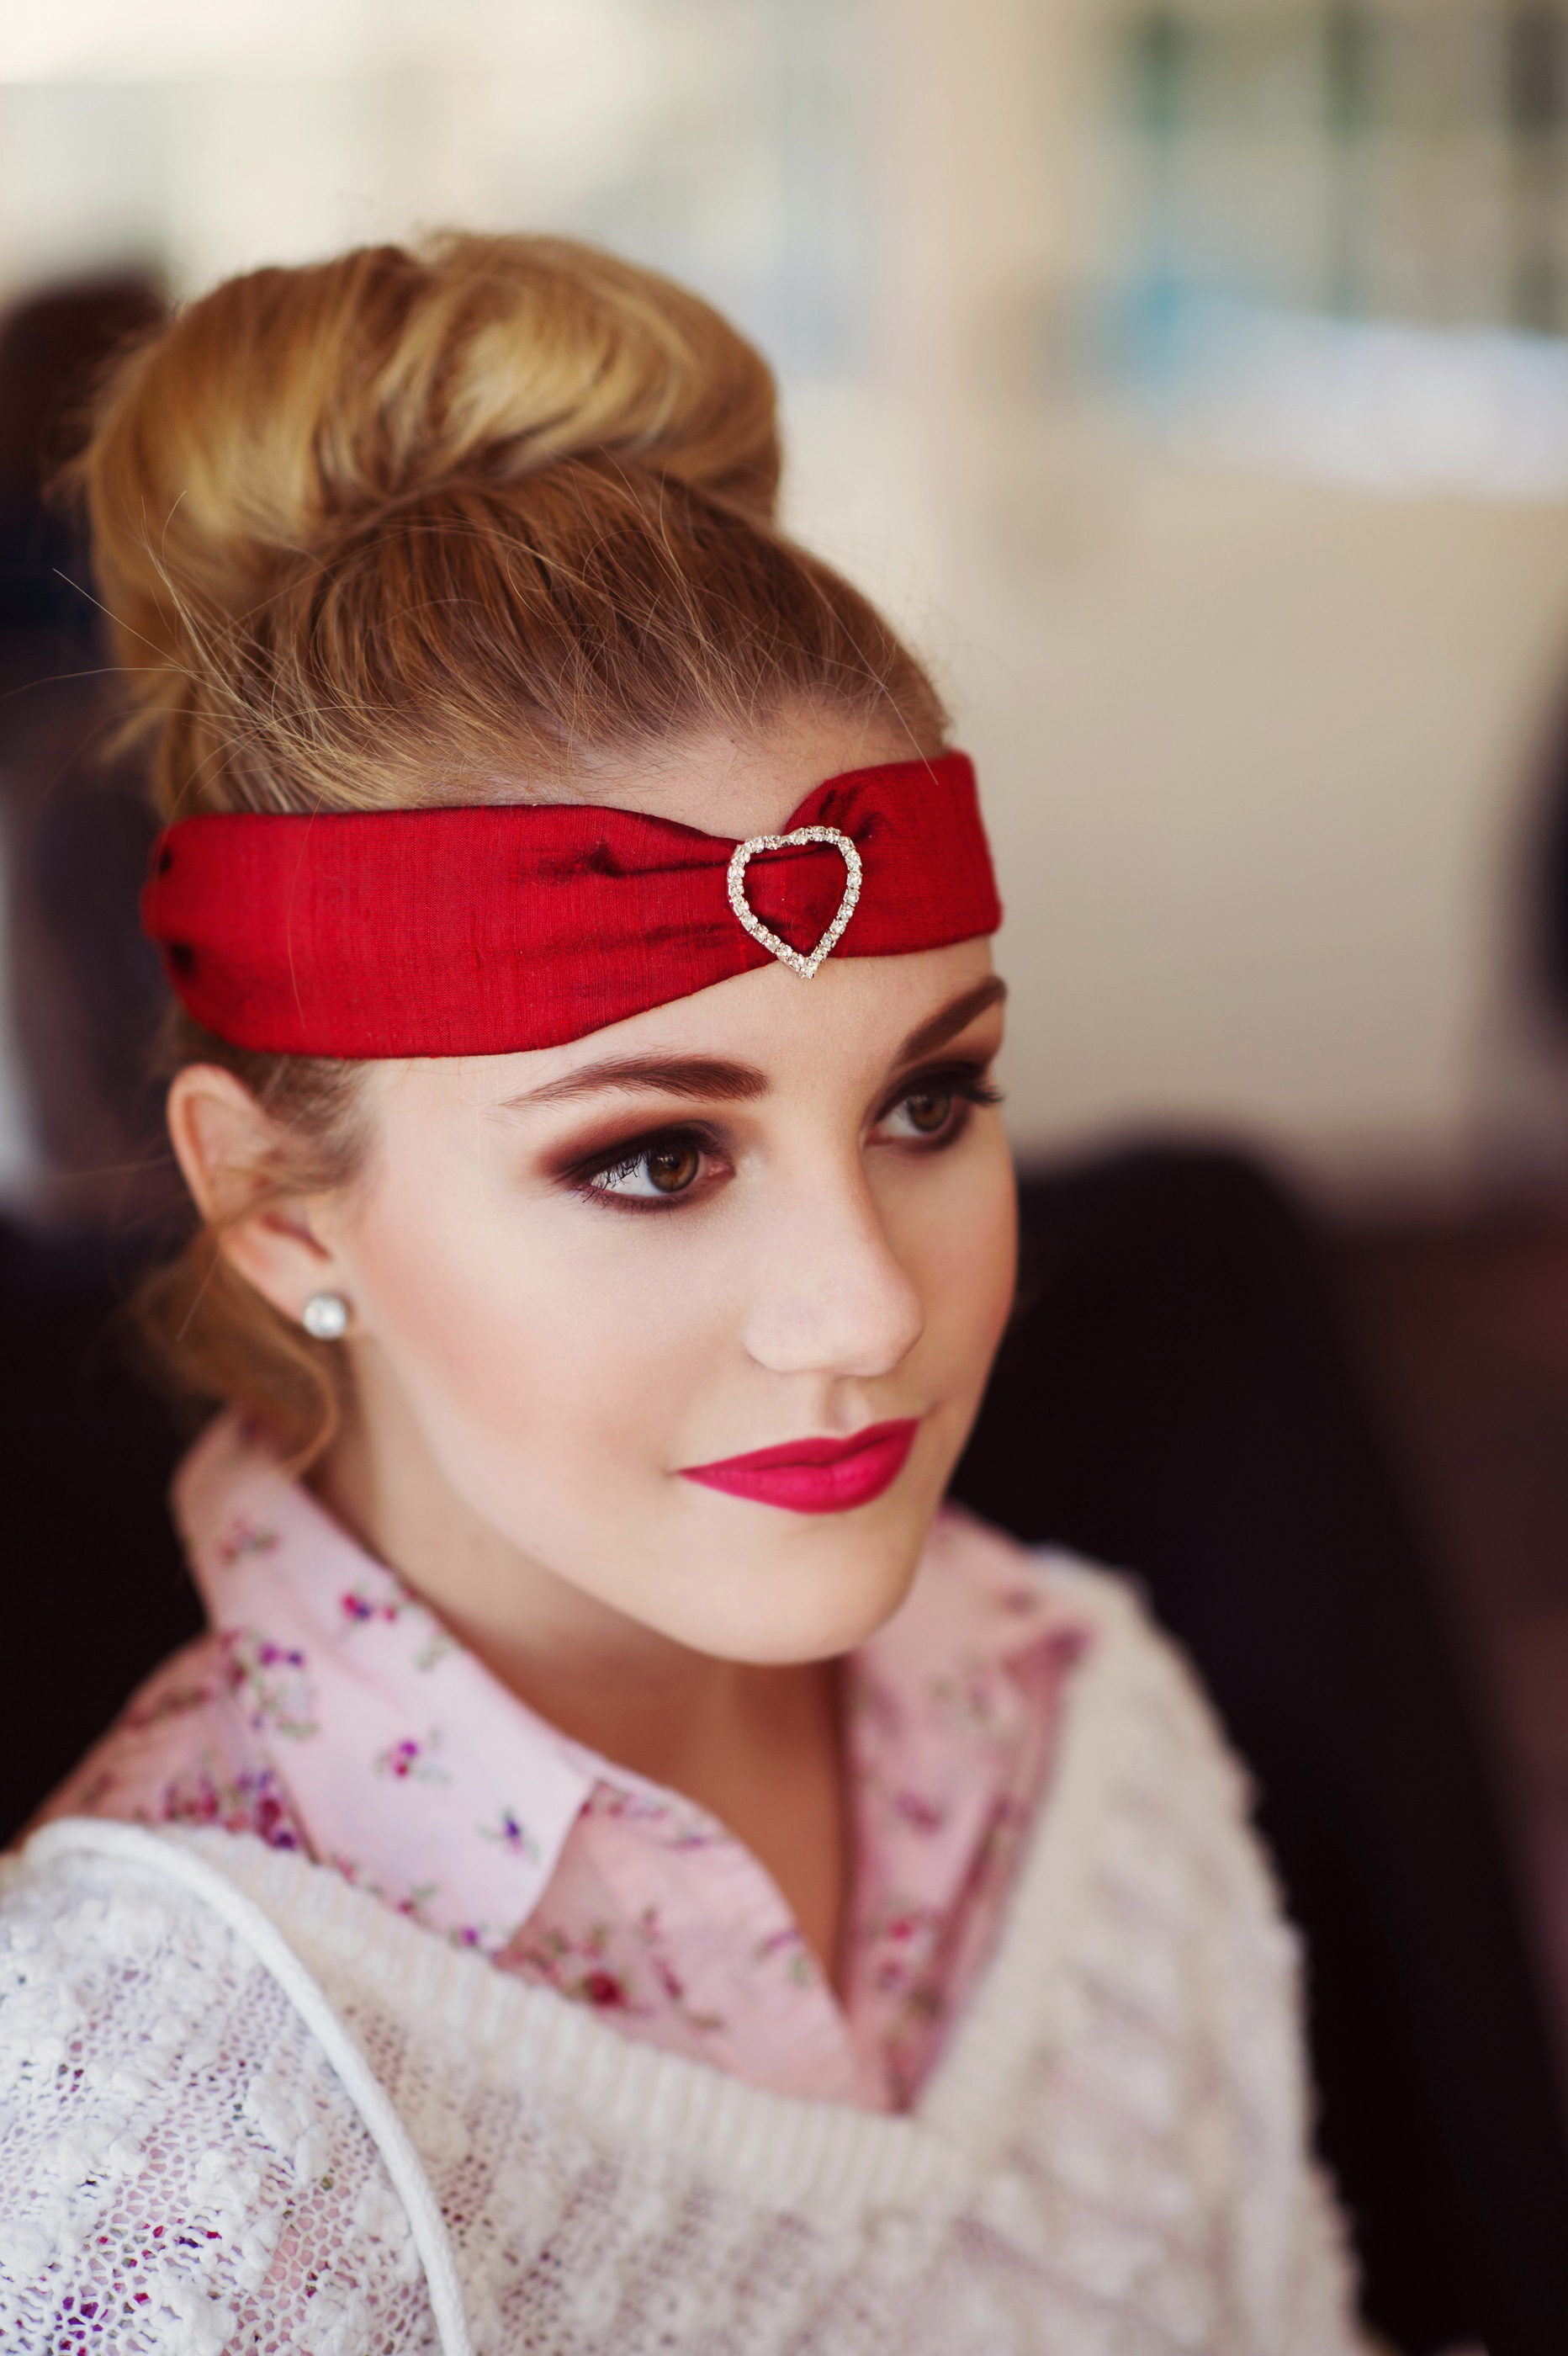 Ruby Red Dupioni Silk and Heart Shaped Rhinestone Headband from CristaBela's Boutique